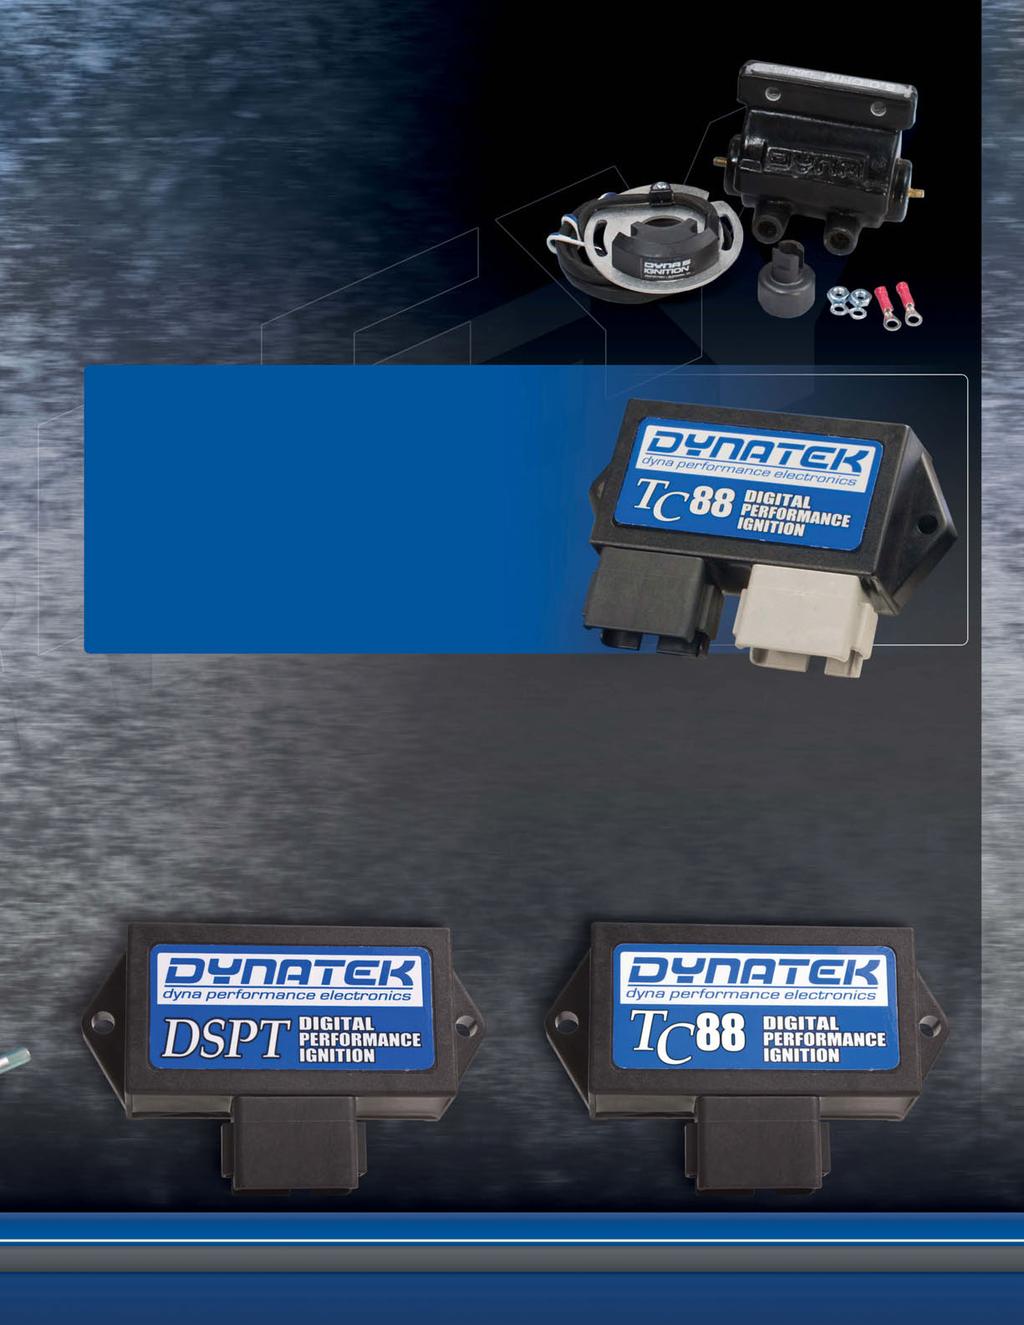 POINTS REPLACEMENT IGNITIONS DYNA S ELECTRONIC IGNITION DSK6-1 The Dyna S is a complete self-contained electronic ignition system built with the latest state-of-the-art engineering.